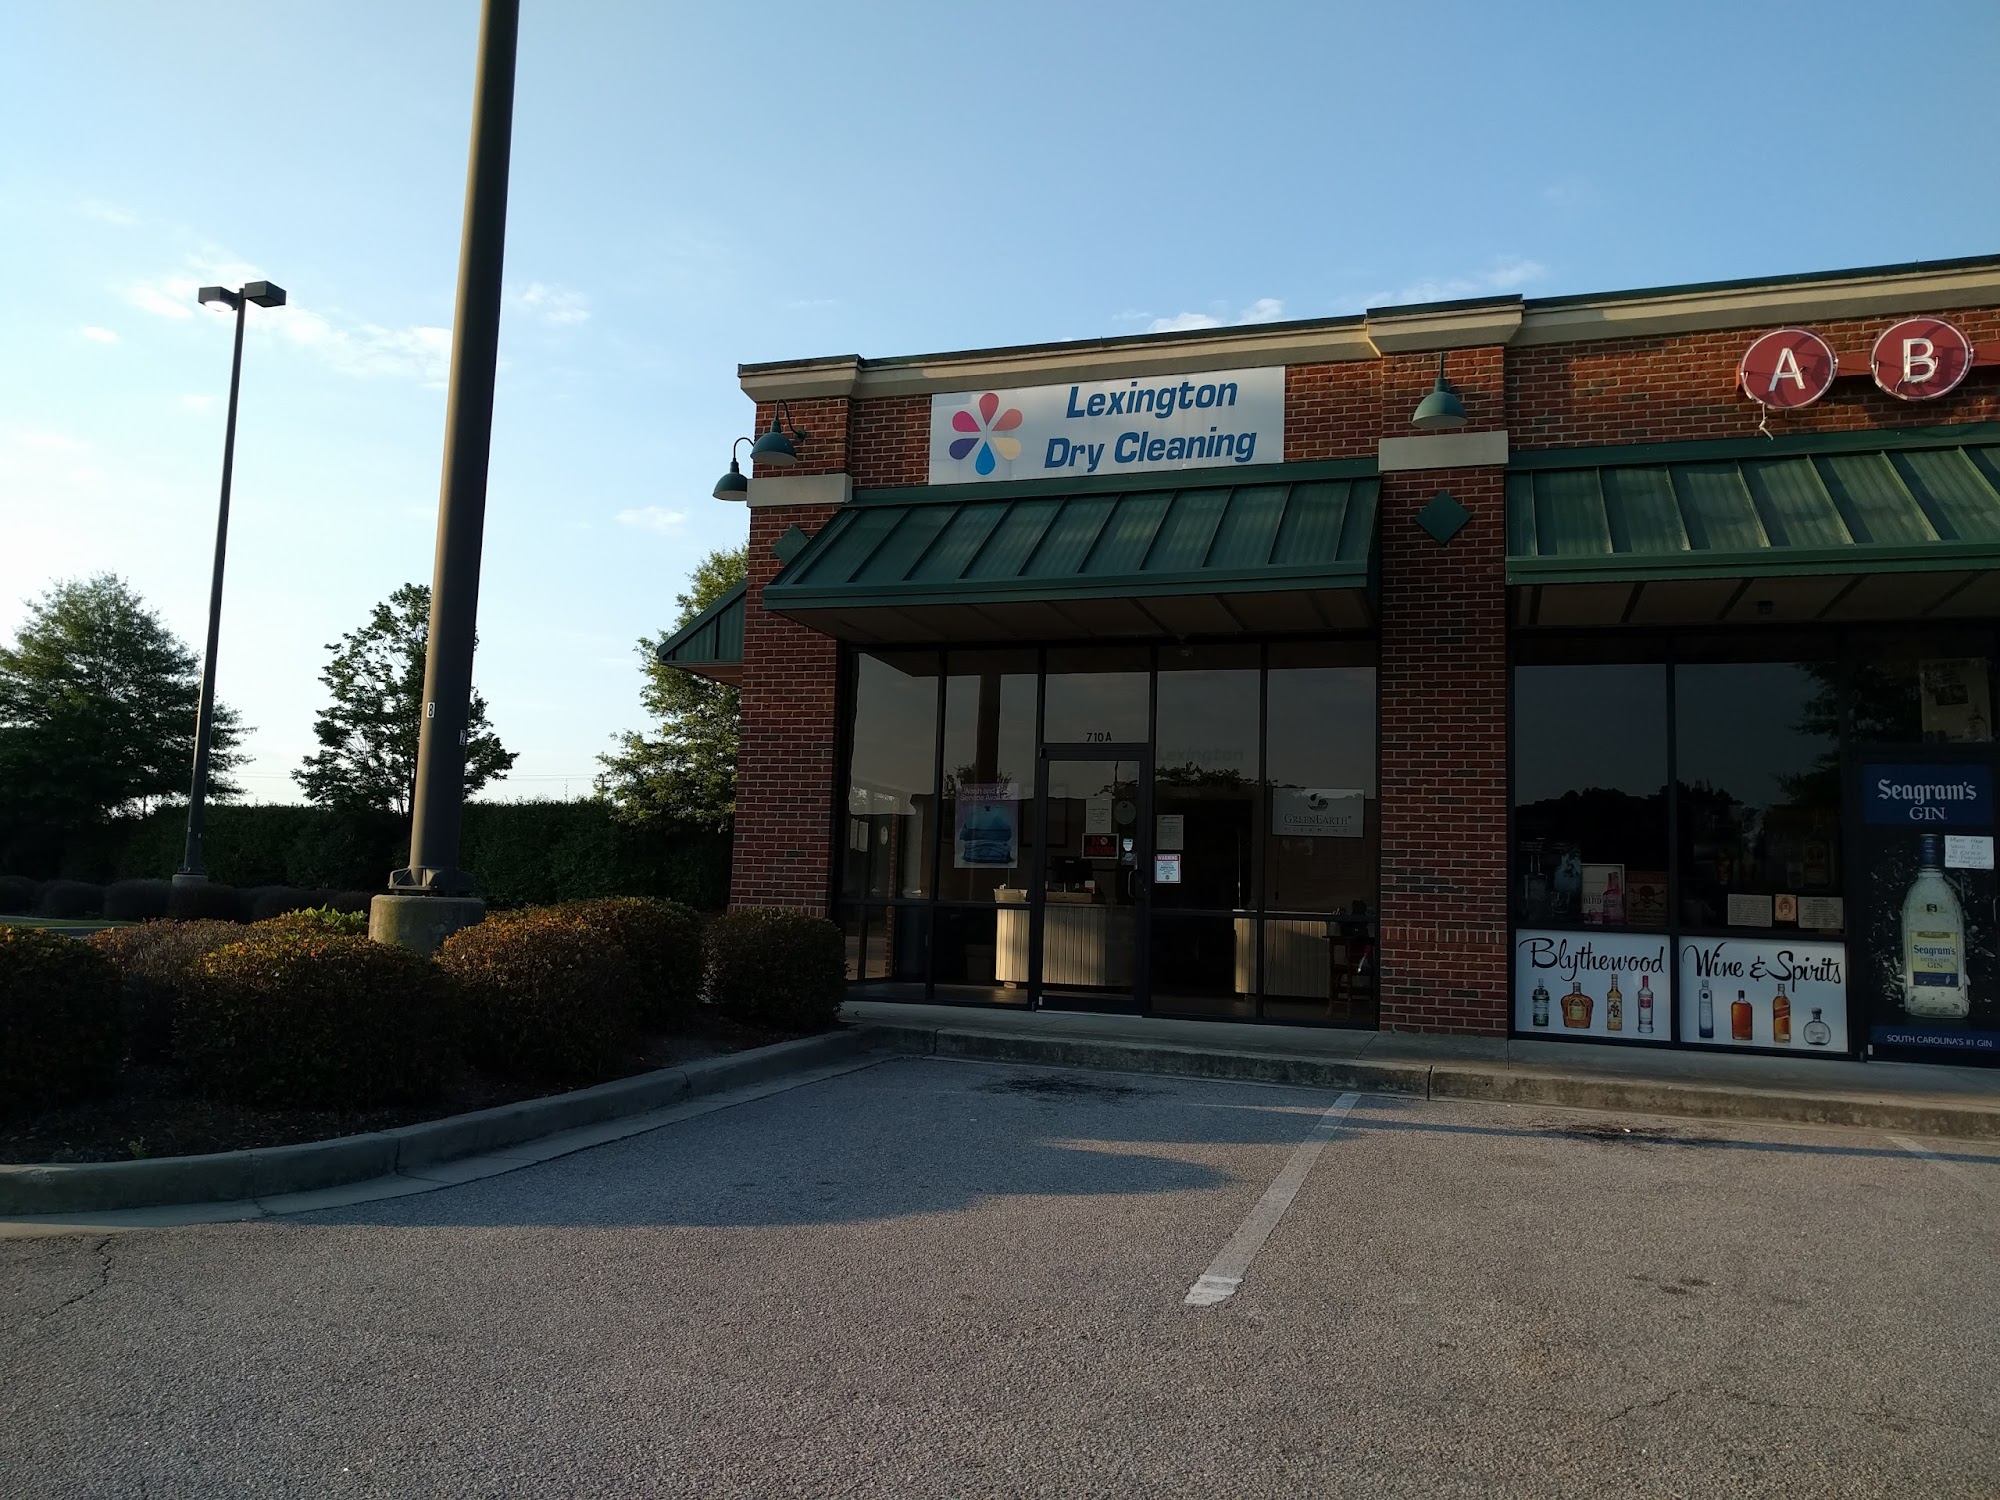 Lexington Dry Cleaning